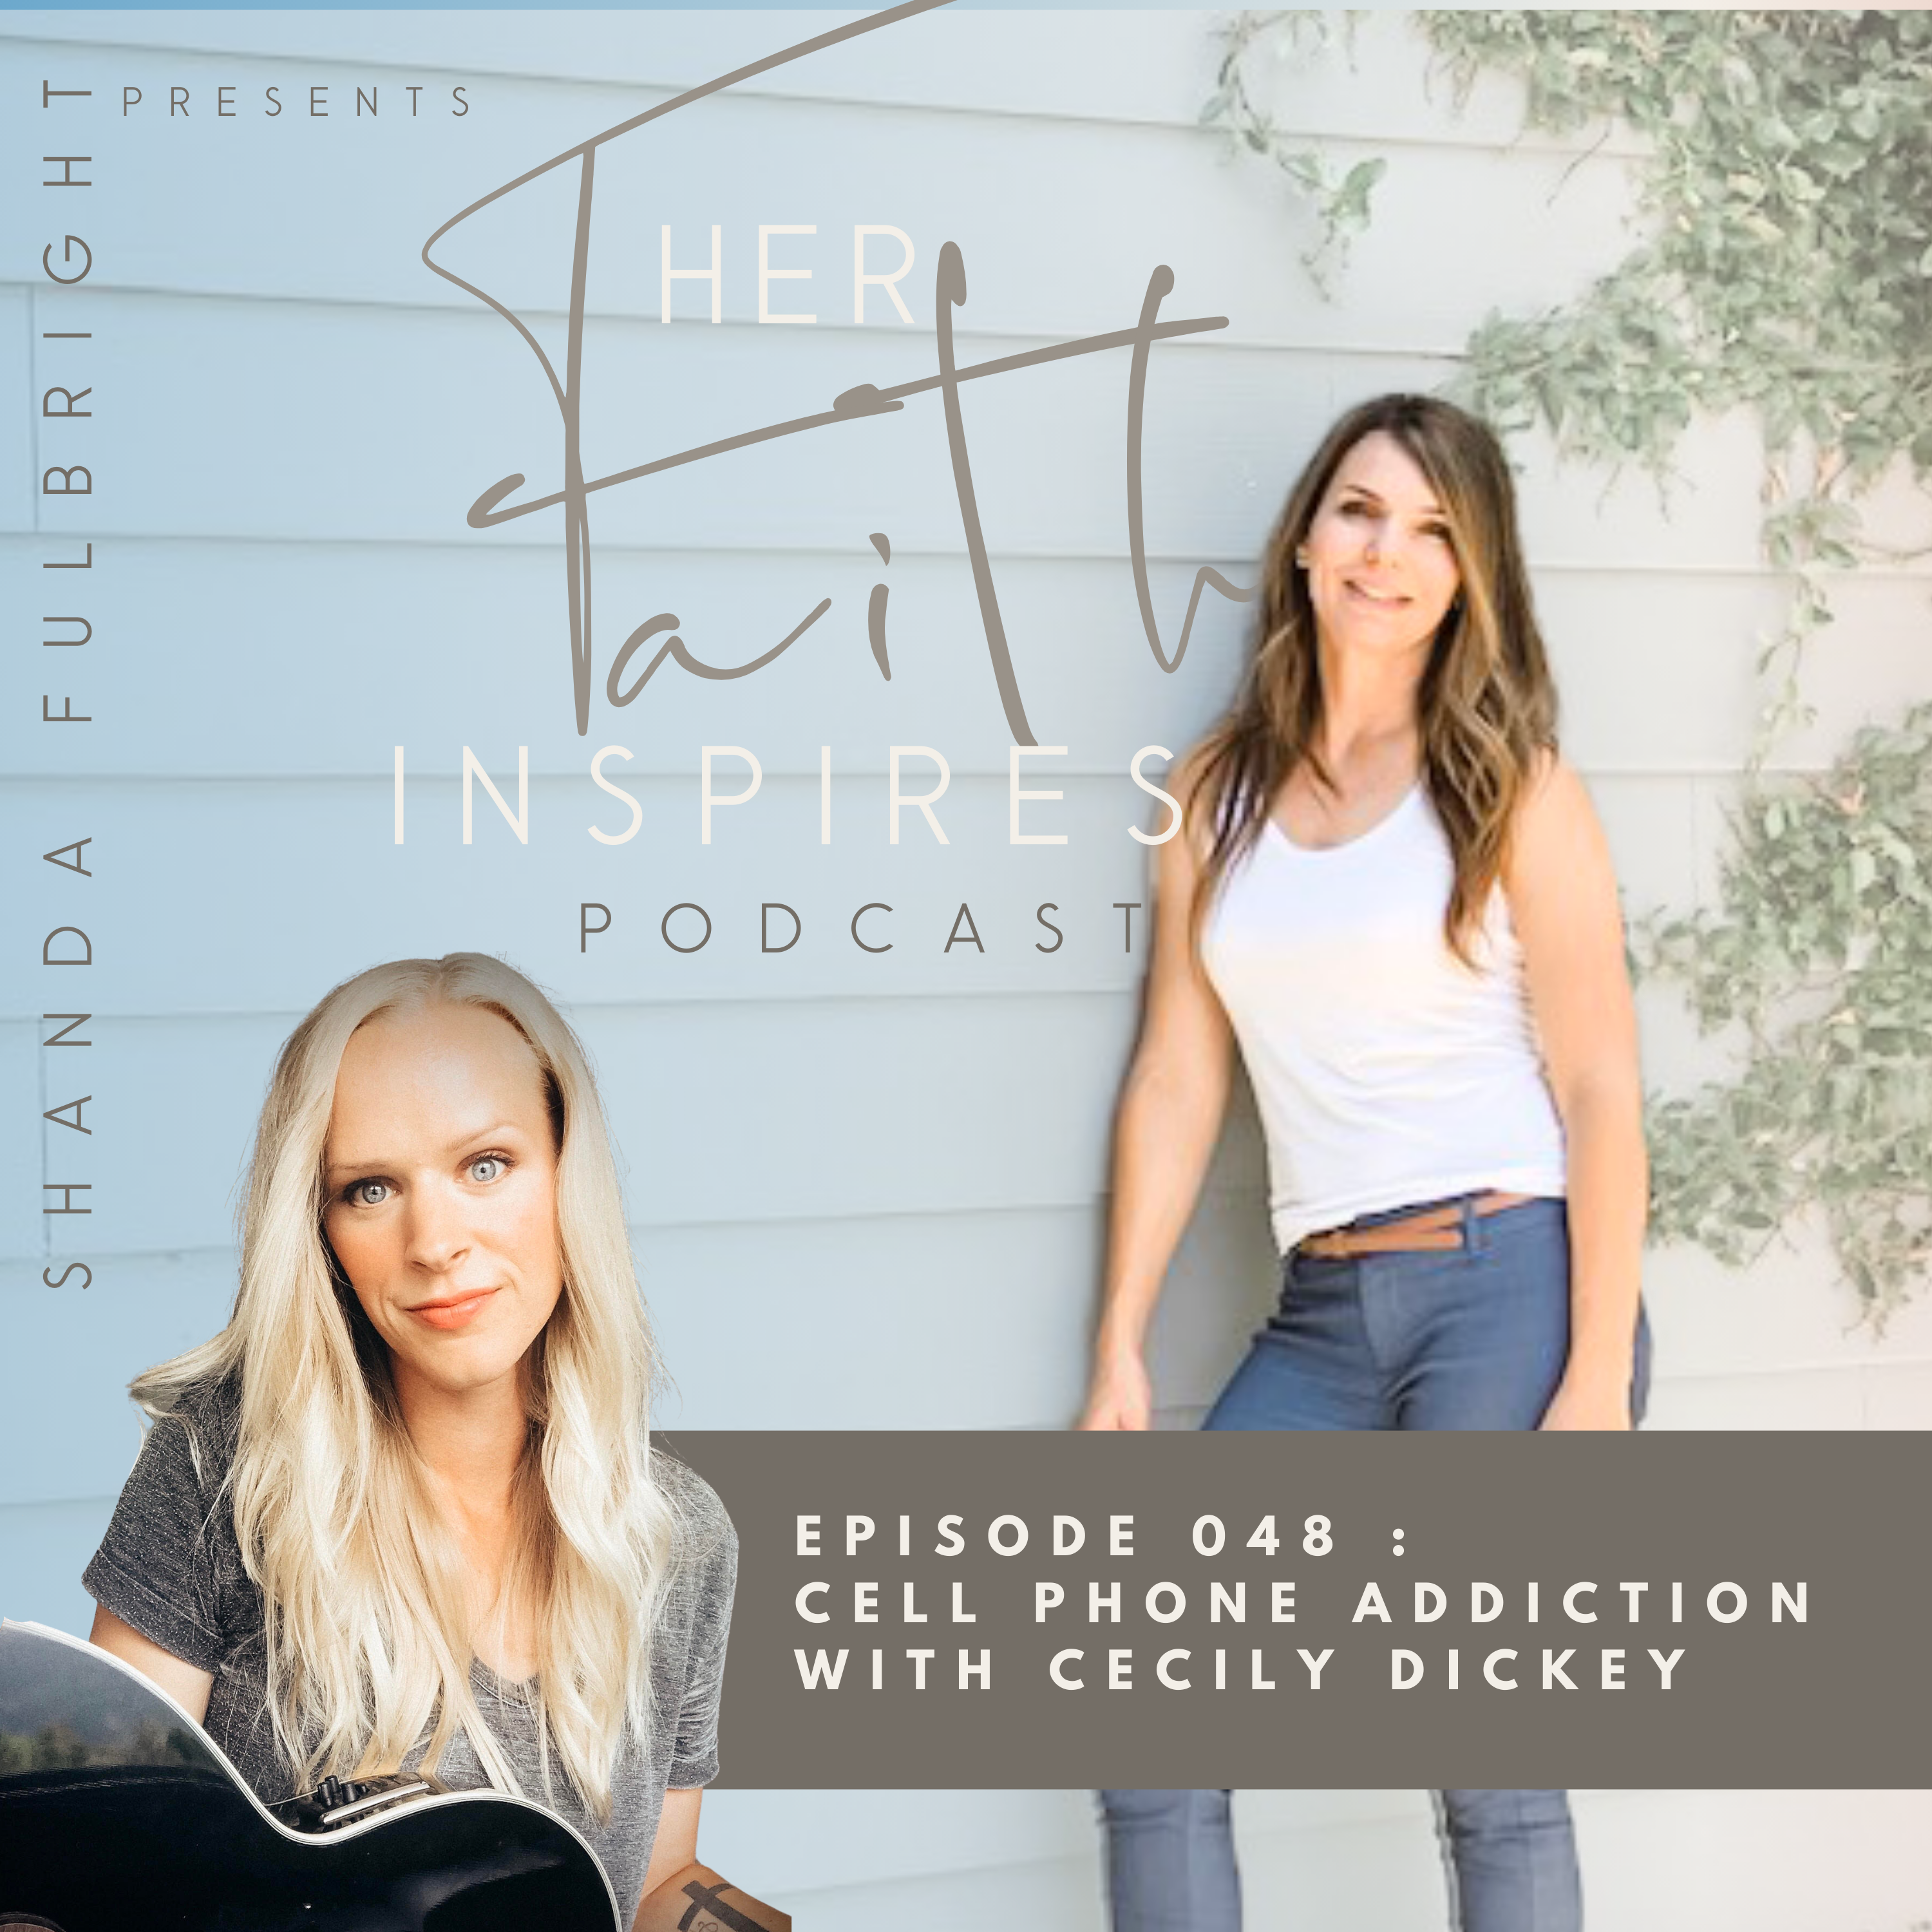 SF Podcast Episode 48 - HER FAITH INSPIRES 048 : Cell phone addiction with Cecily Dickey